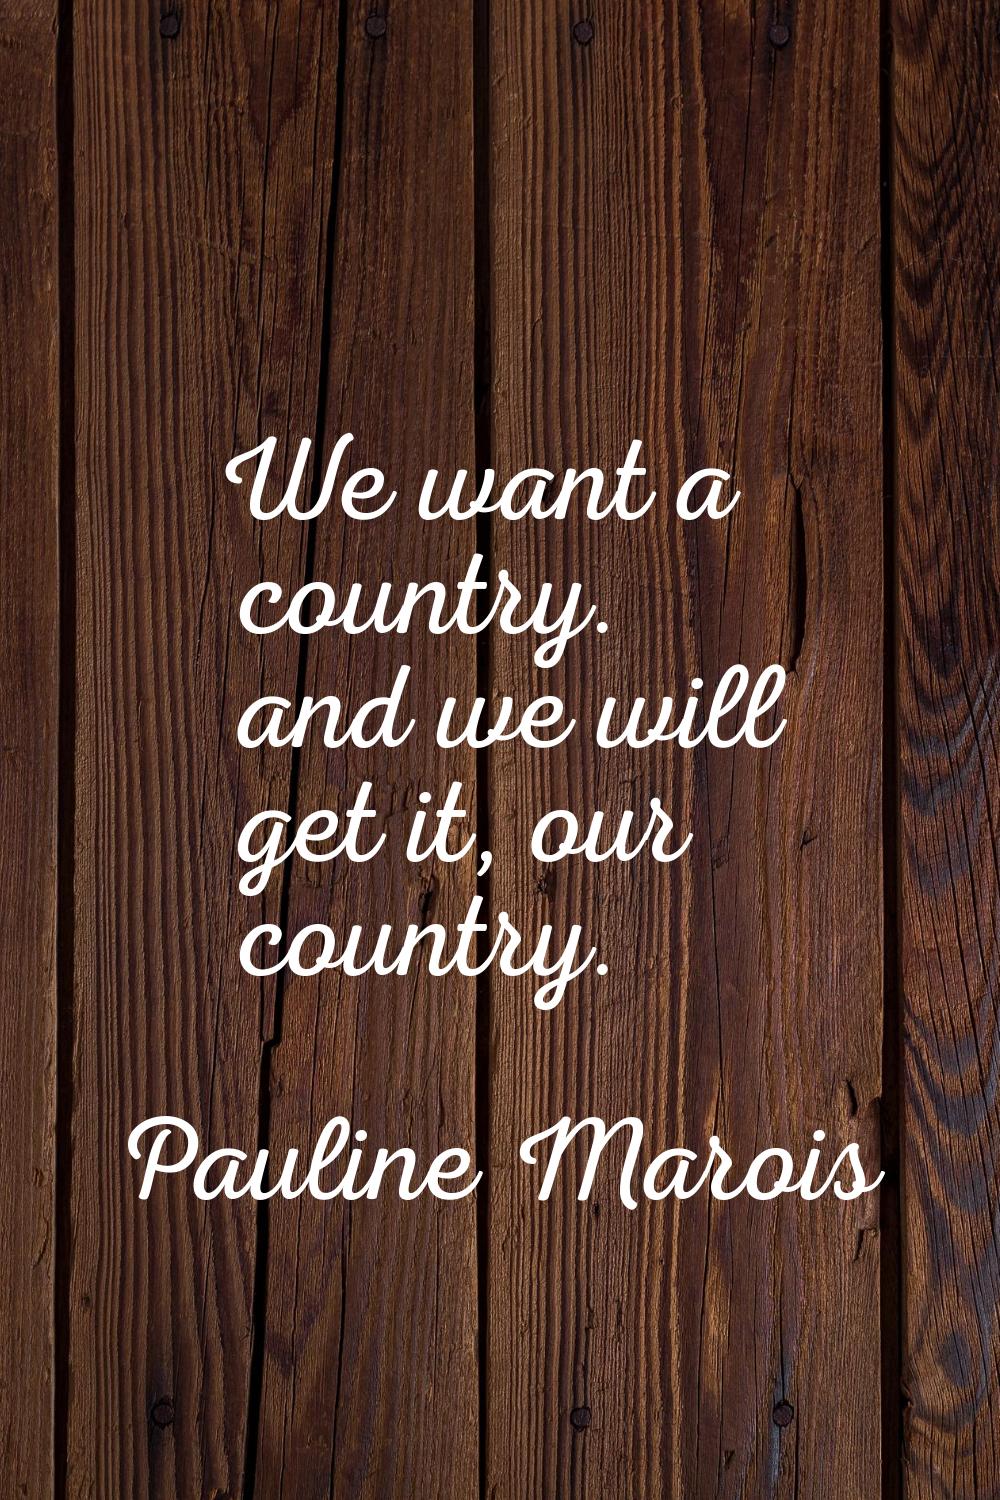 We want a country. and we will get it, our country.